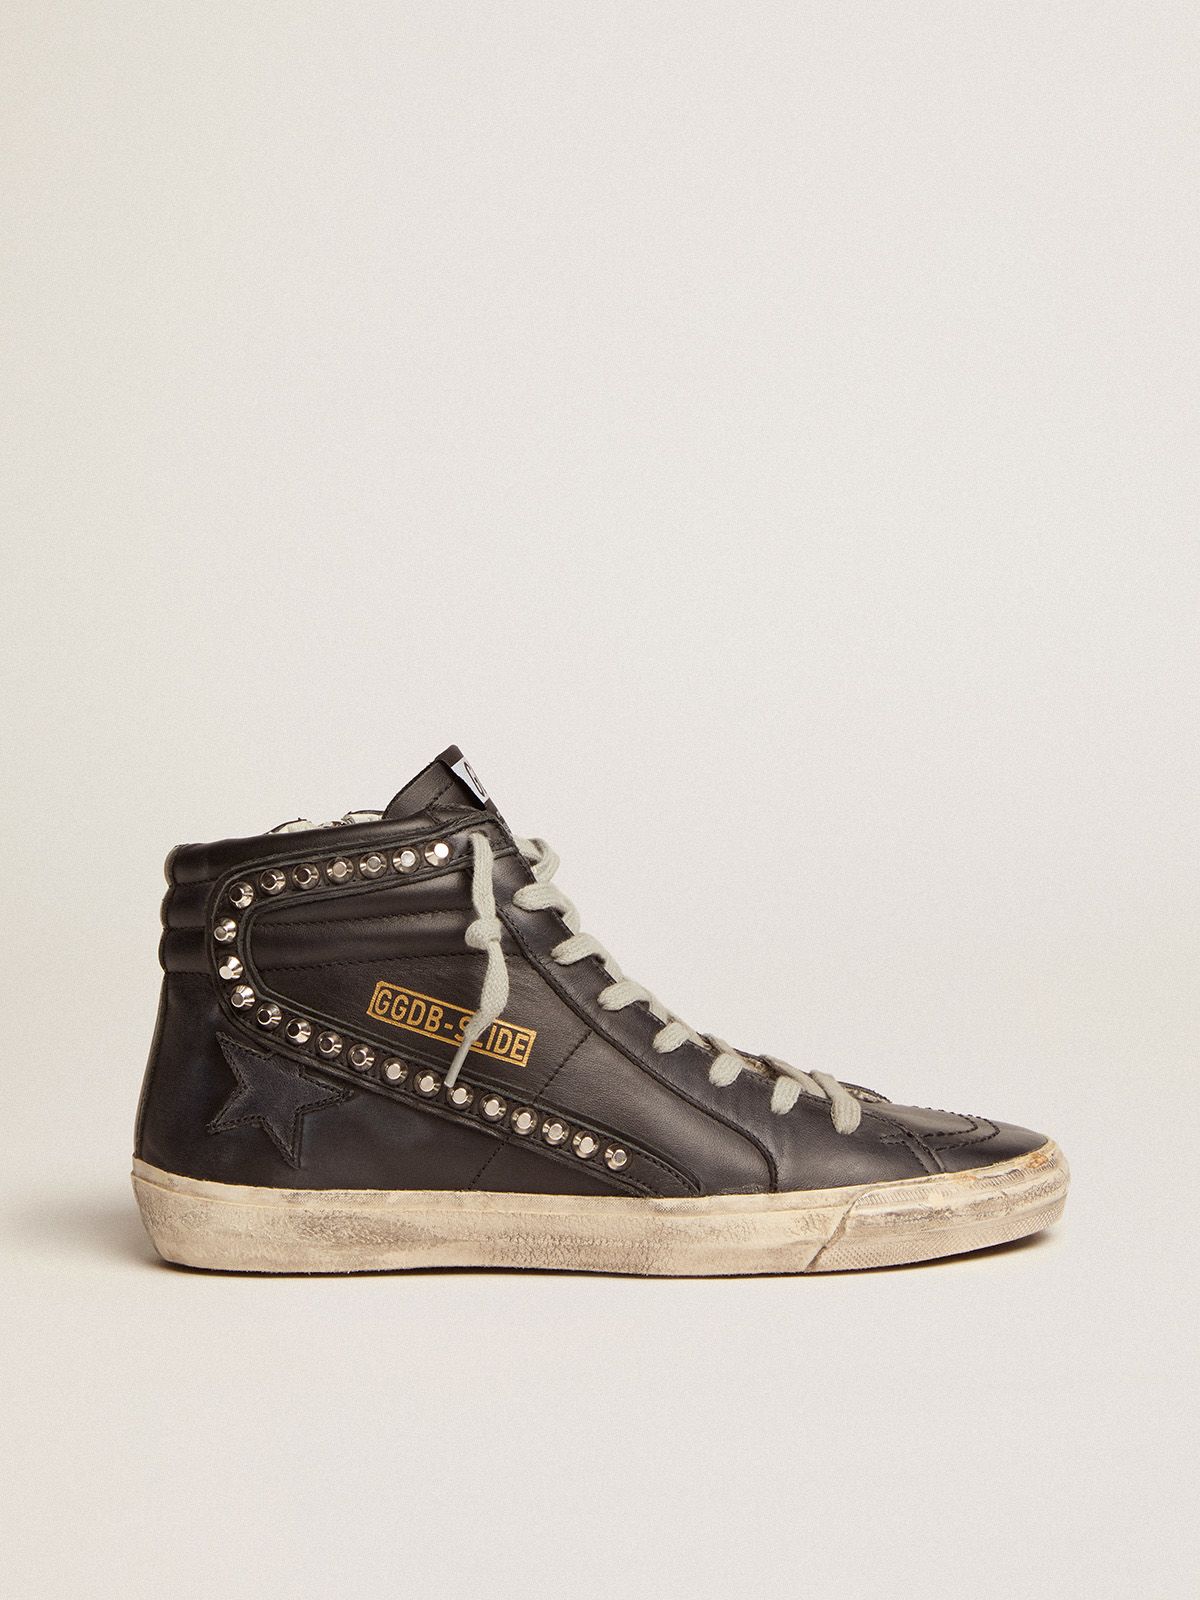 golden goose Slide sneakers in leather metal studded